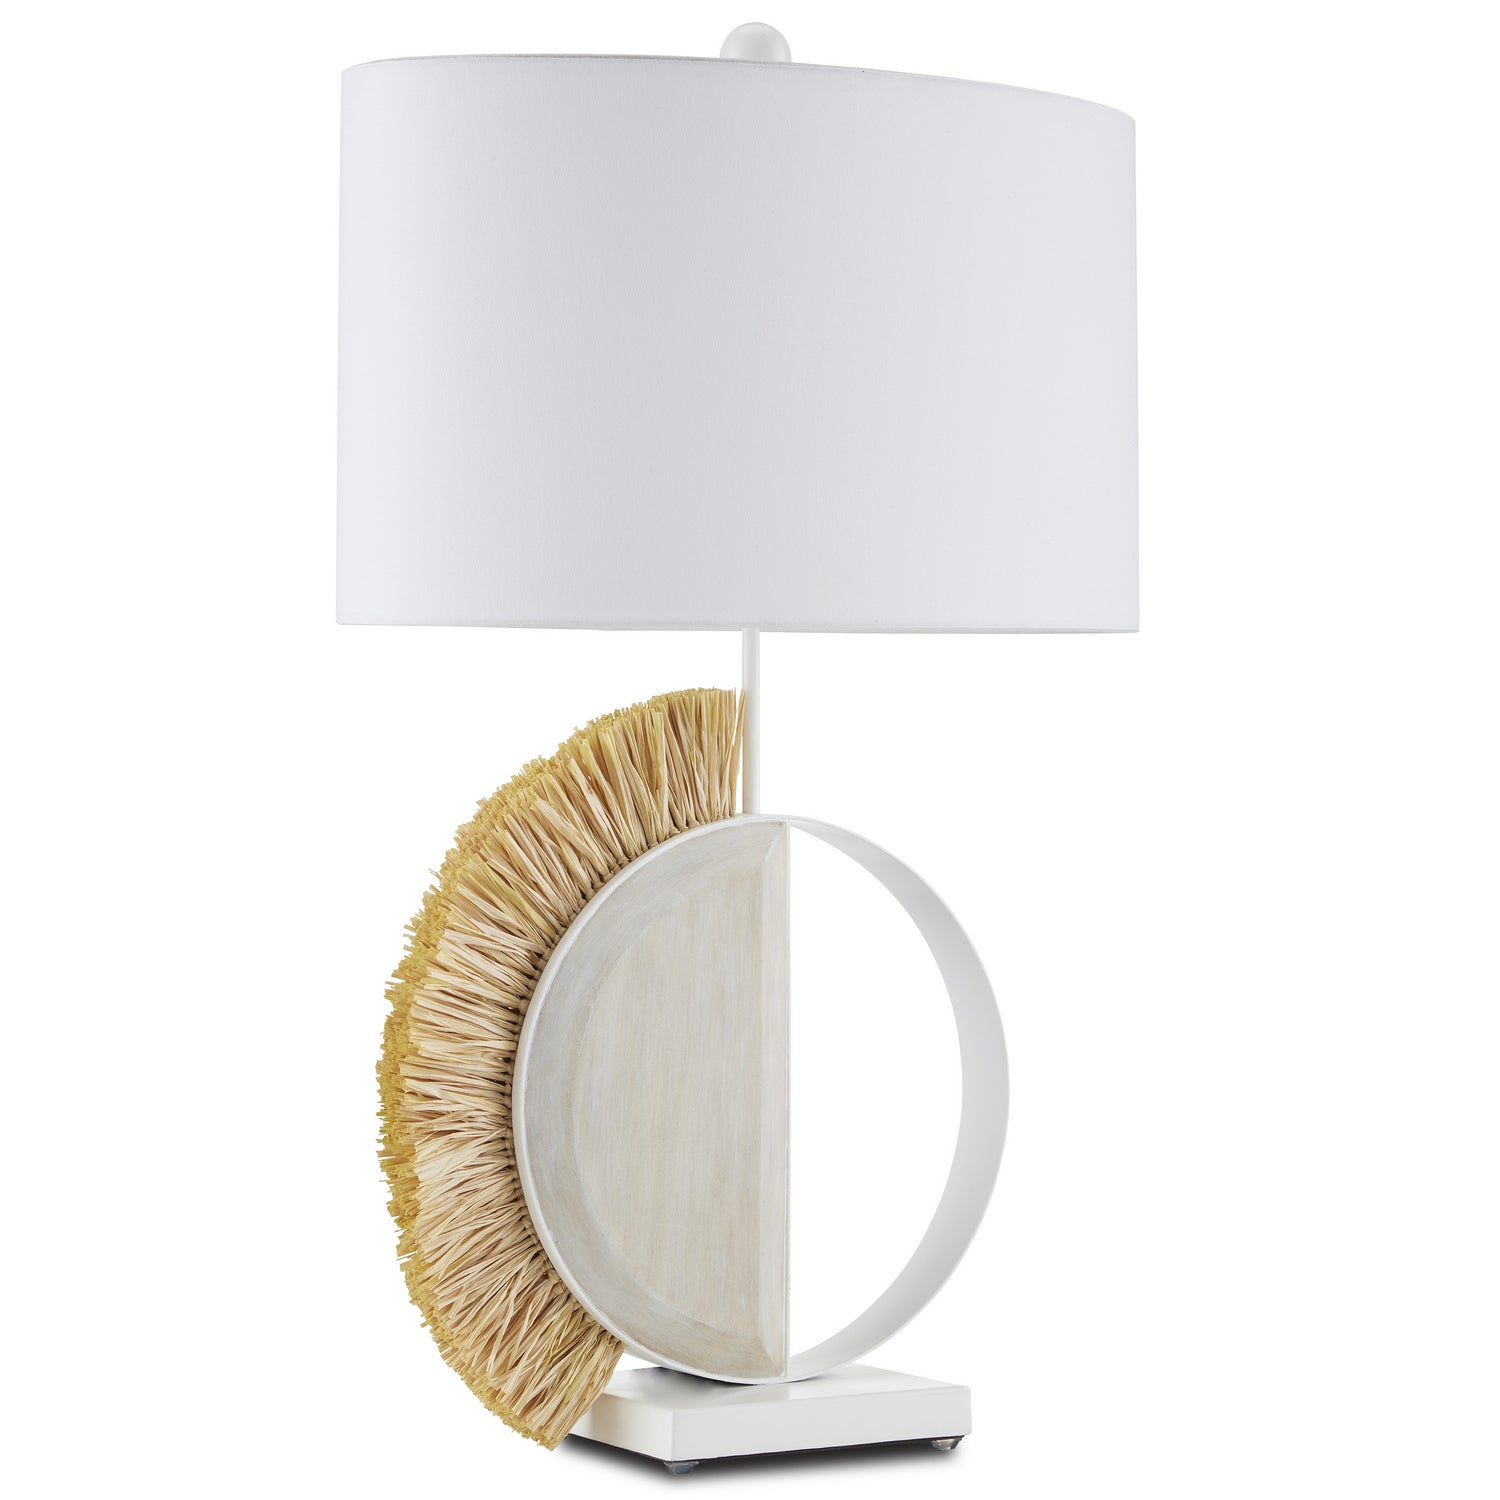 One Light Table Lamp from the Jamie Beckwith collection in White/Sandstone/Natural finish